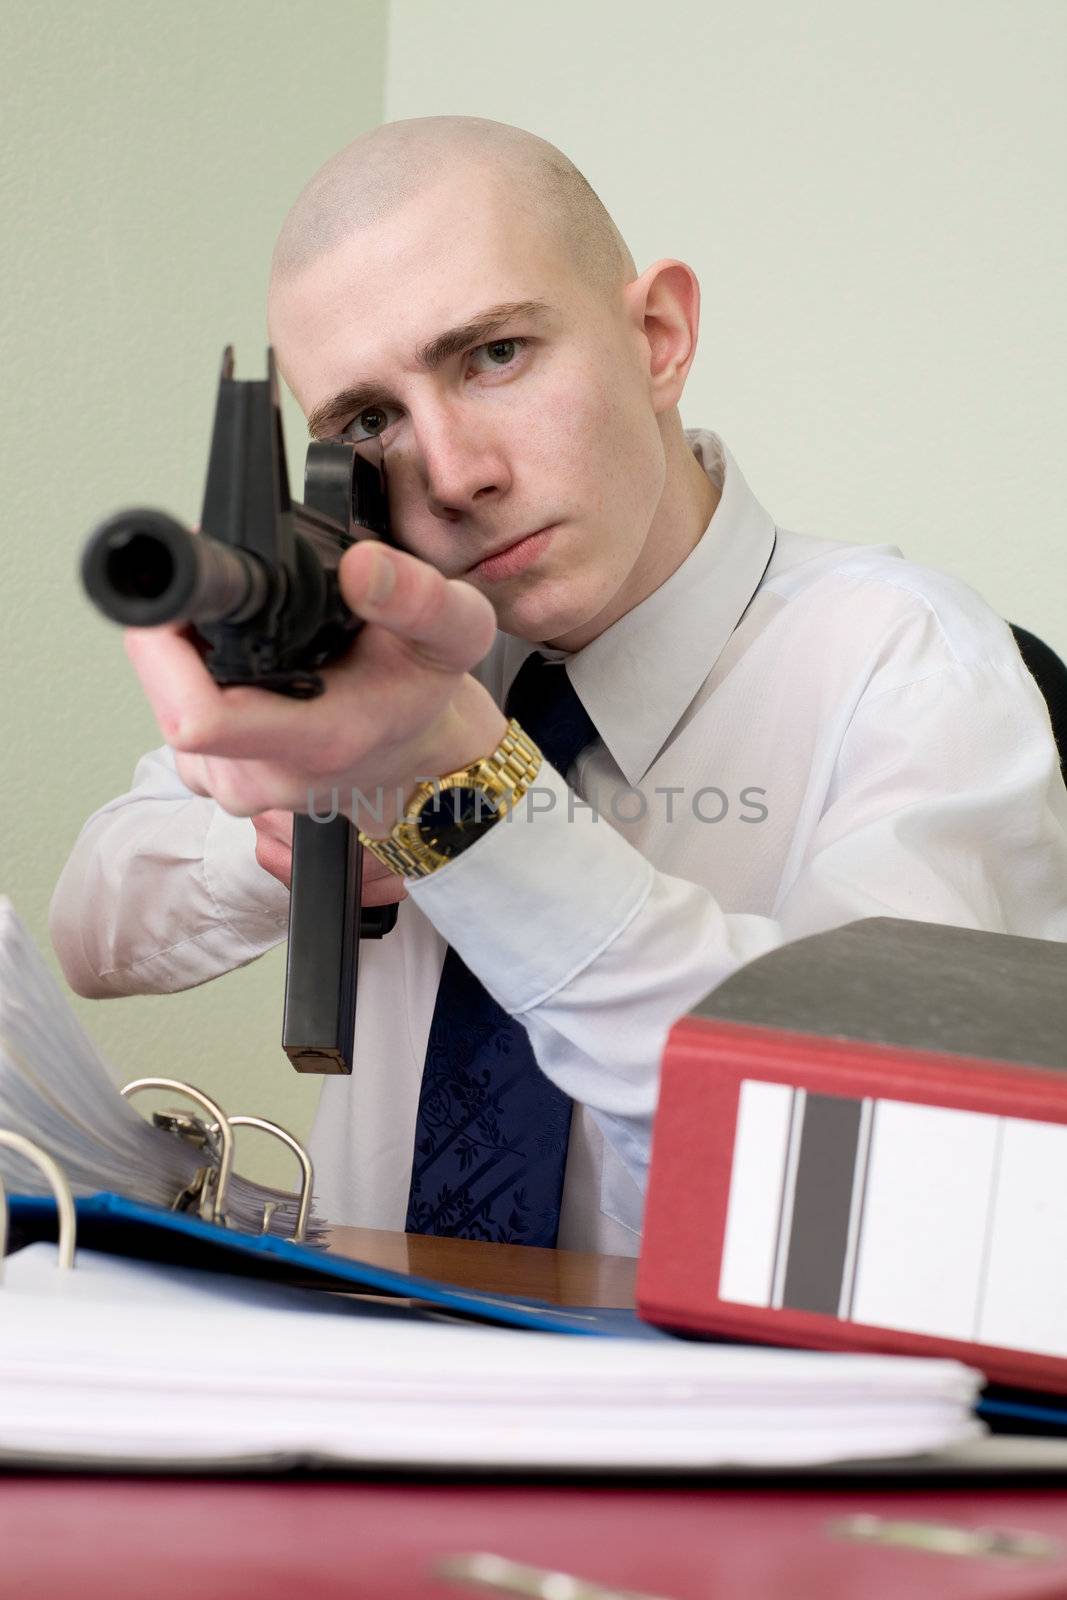 The chief accountant armed with a rifle